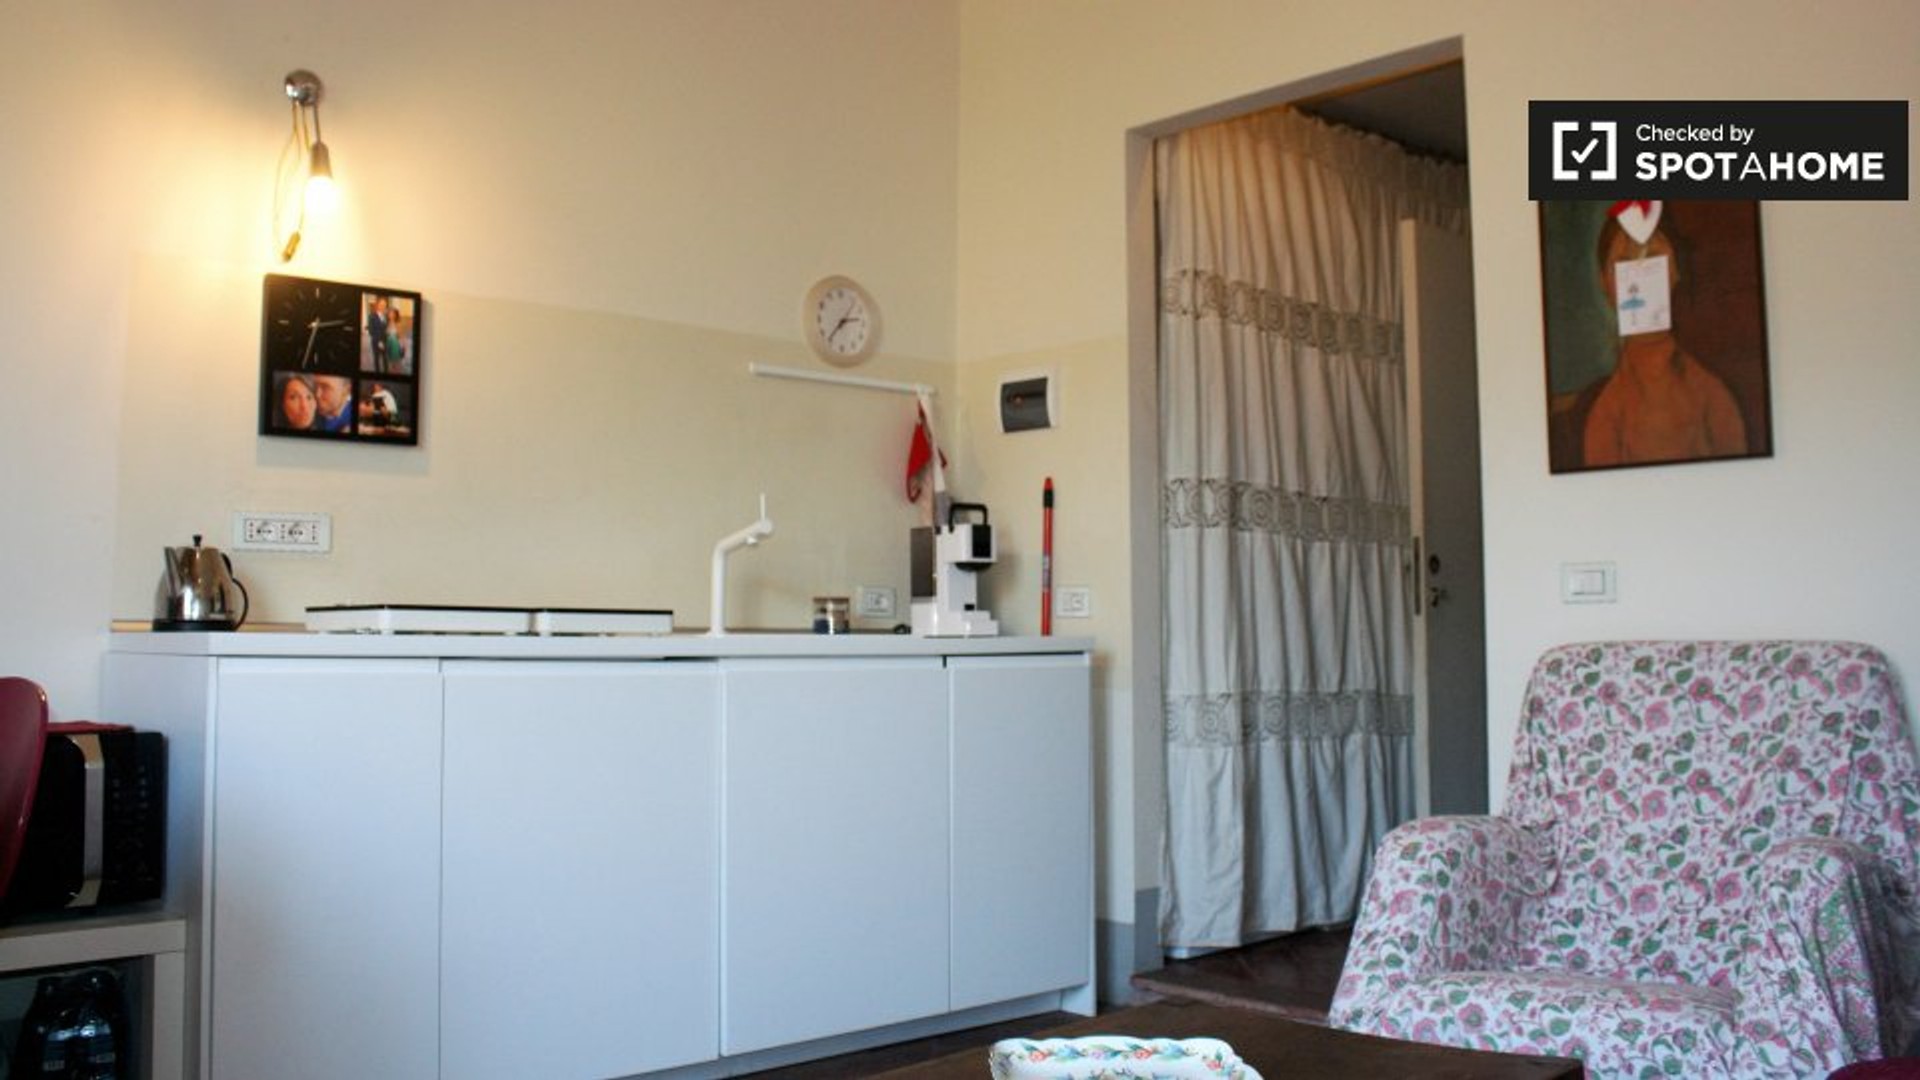 Accommodation in the centre of Florence